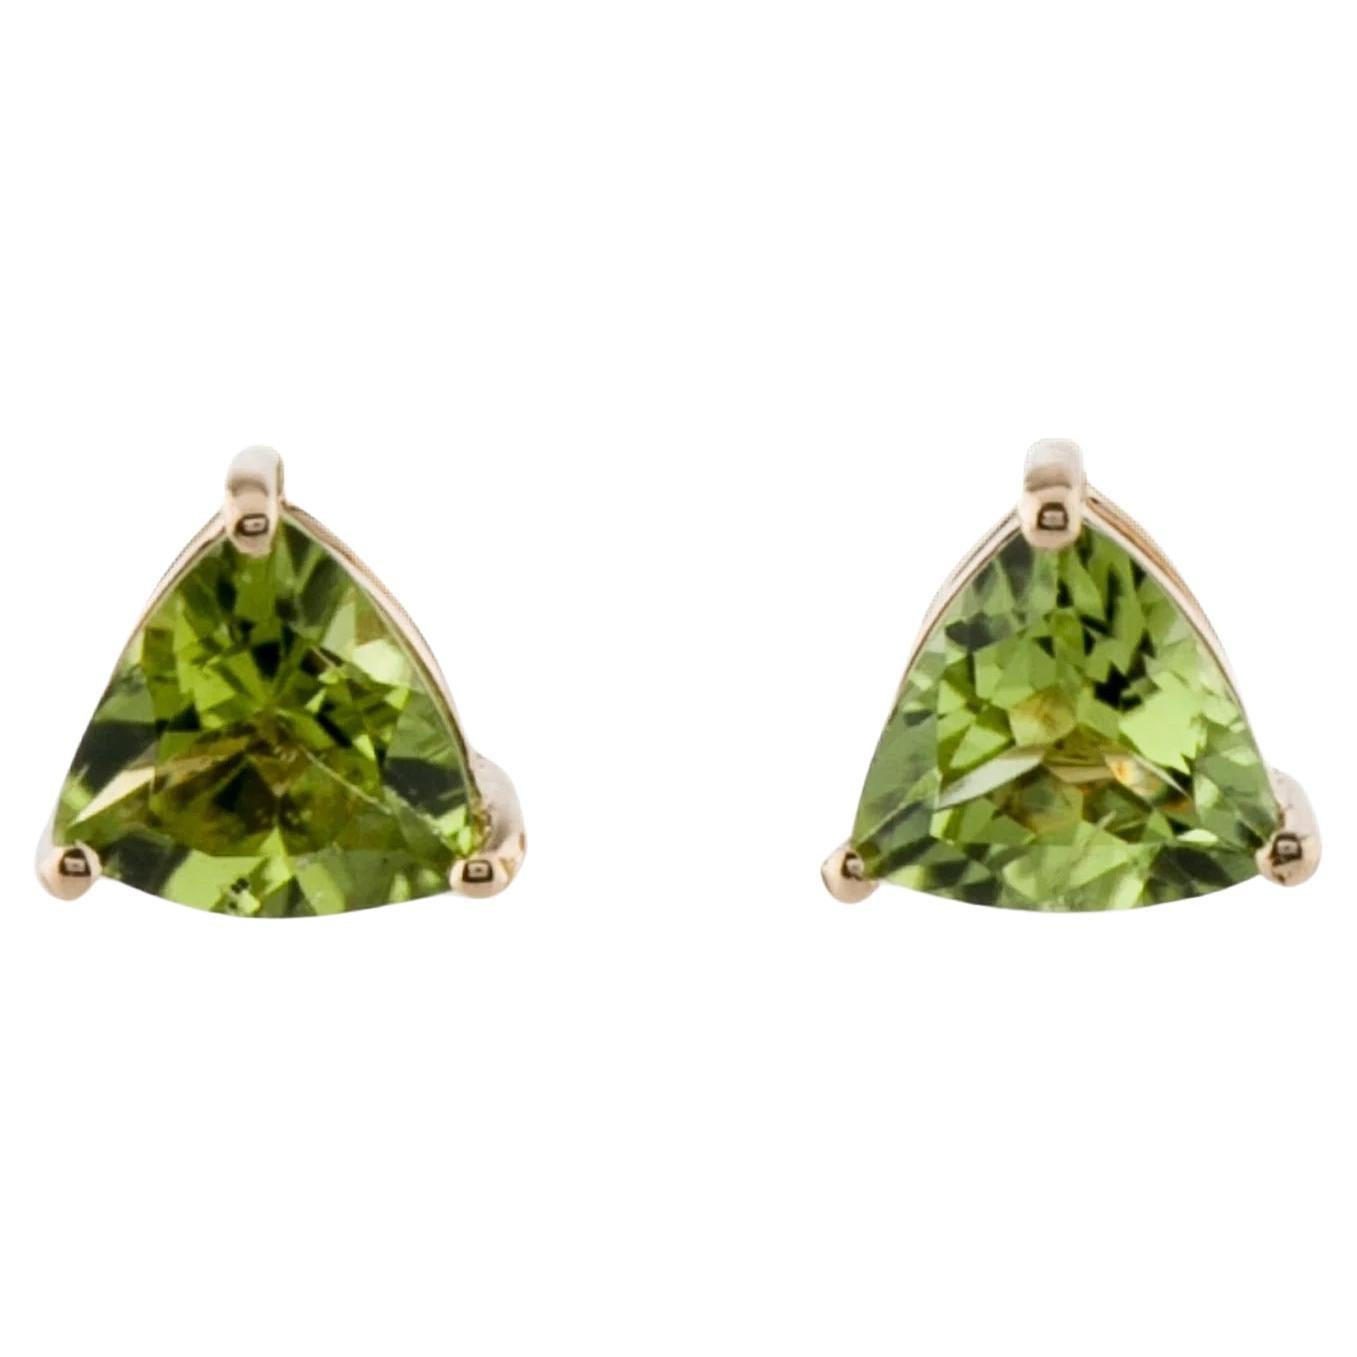 14K Peridot Stud Earrings - Vibrant Green Gemstones, 2.15 Carats Total Weight For Sale